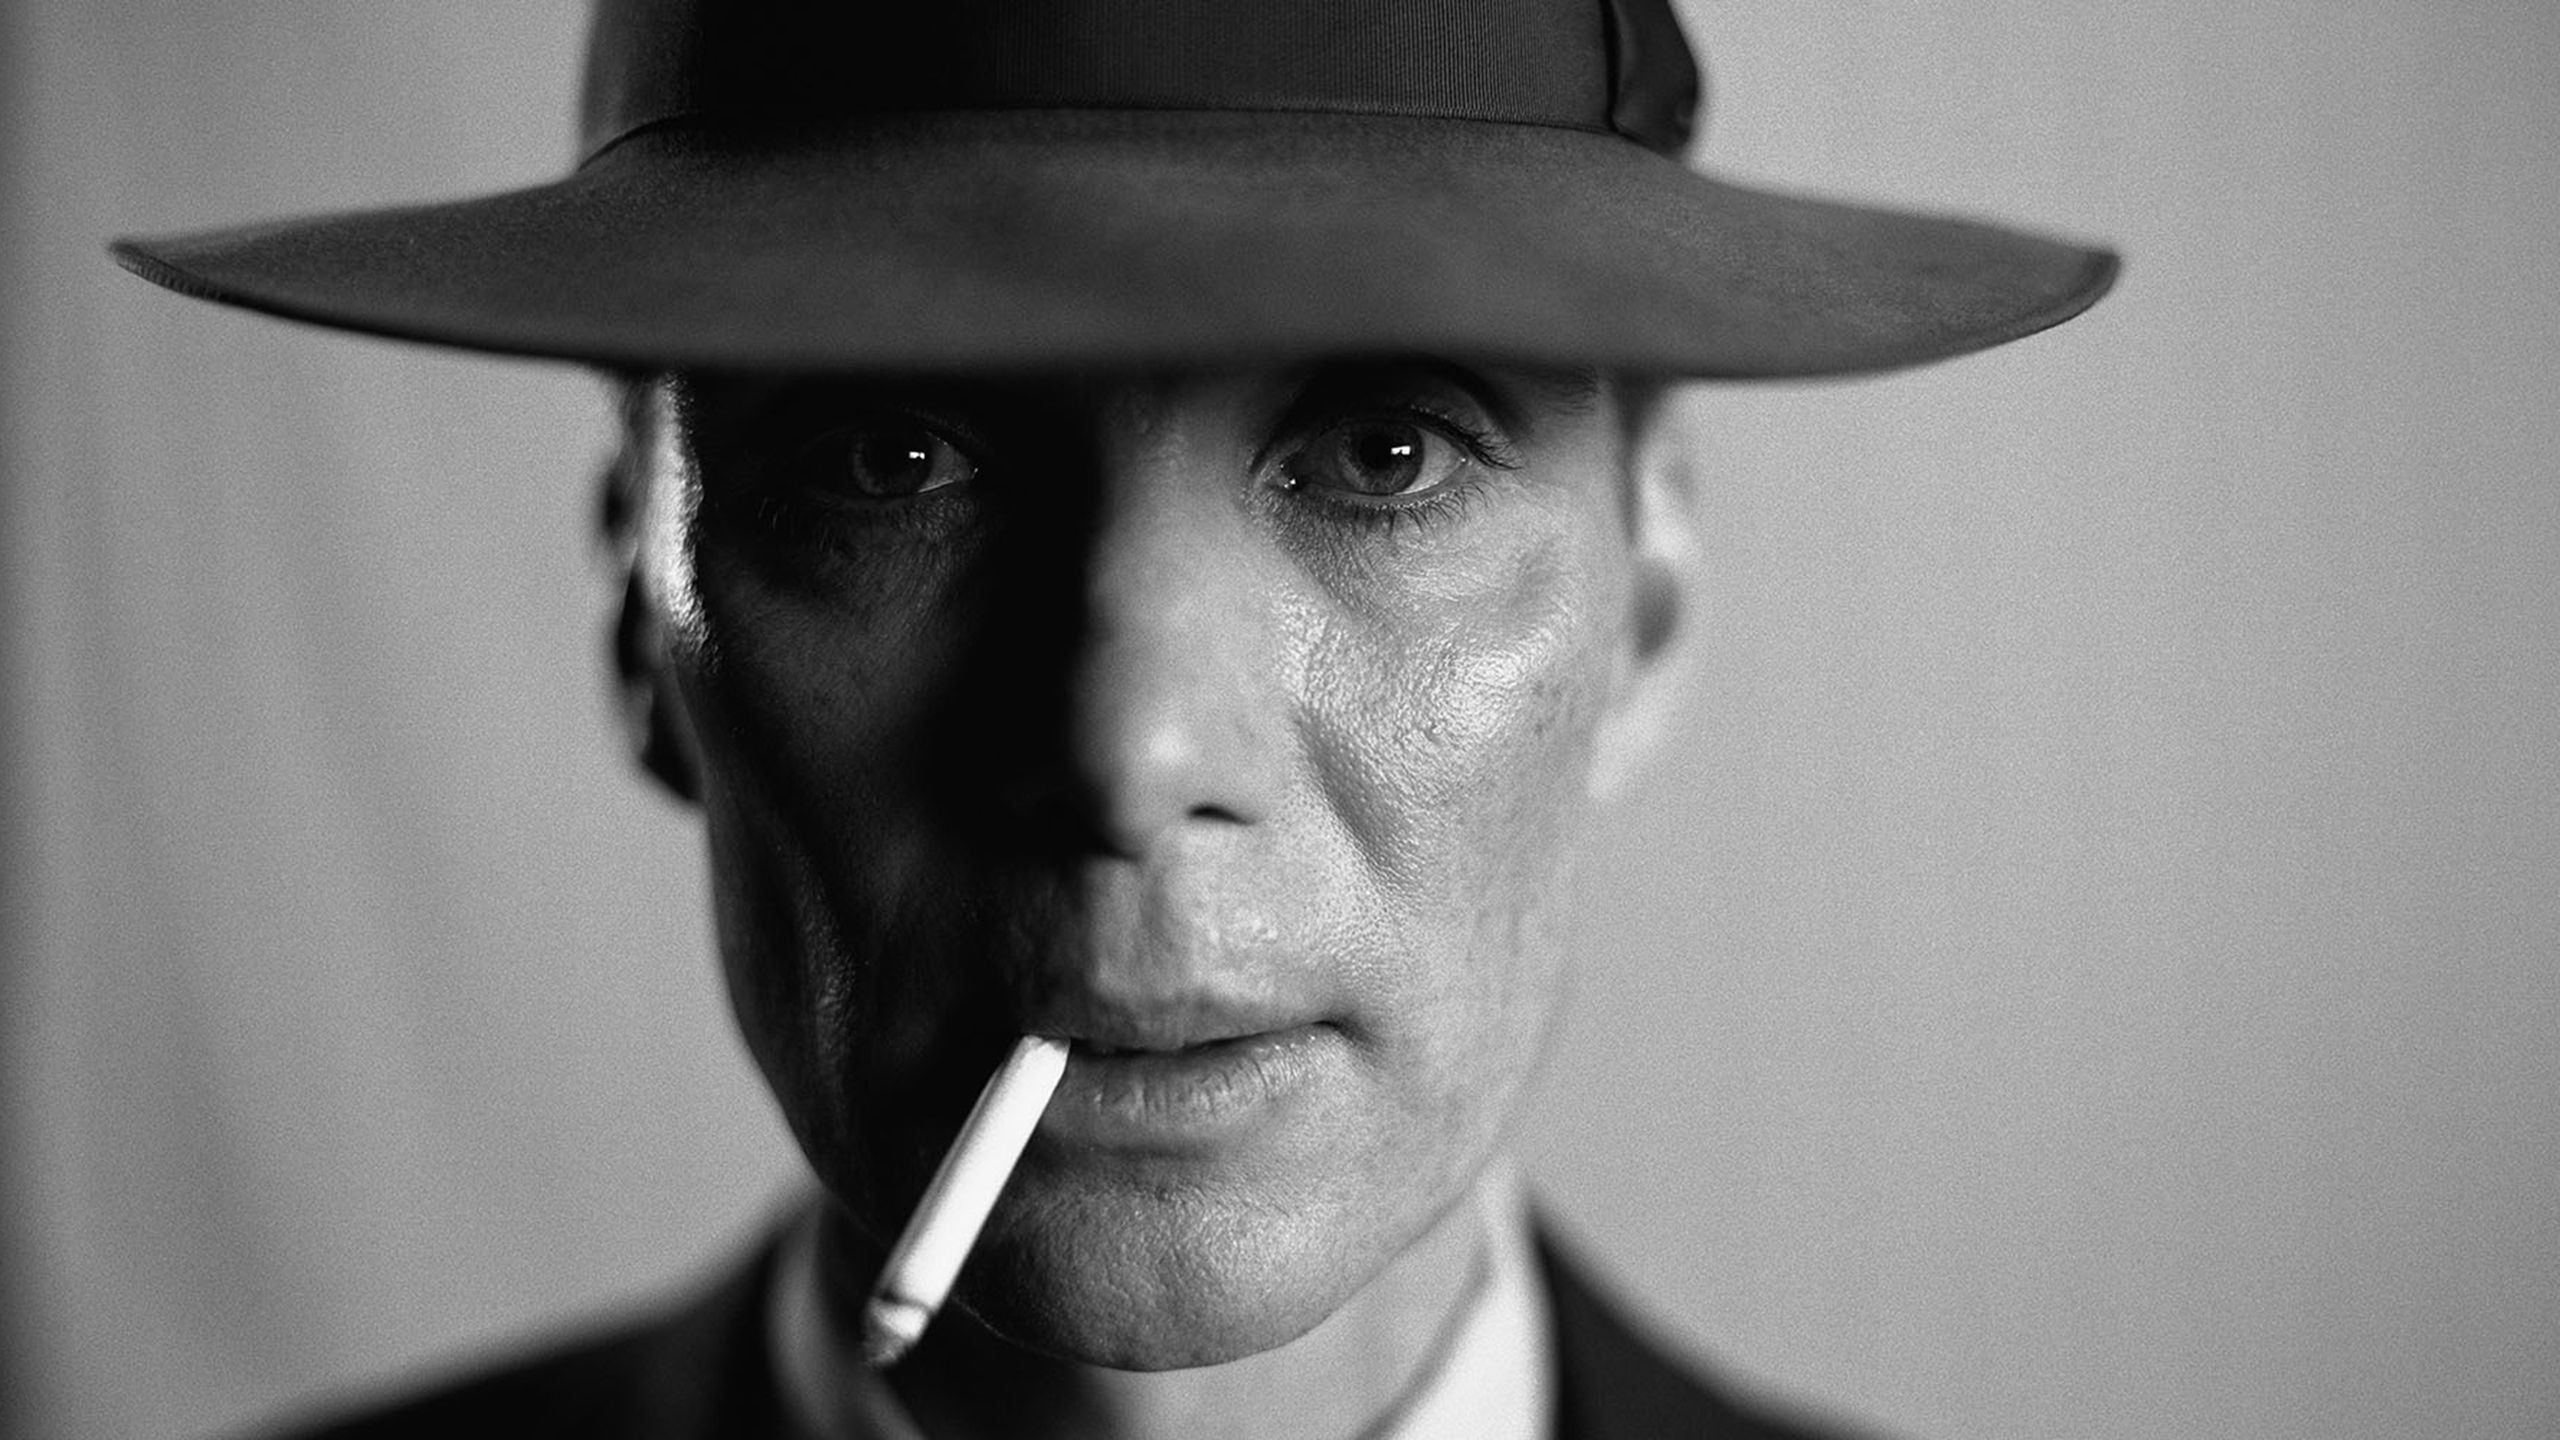 Oppenheimer played by Cillian Murphey in movie